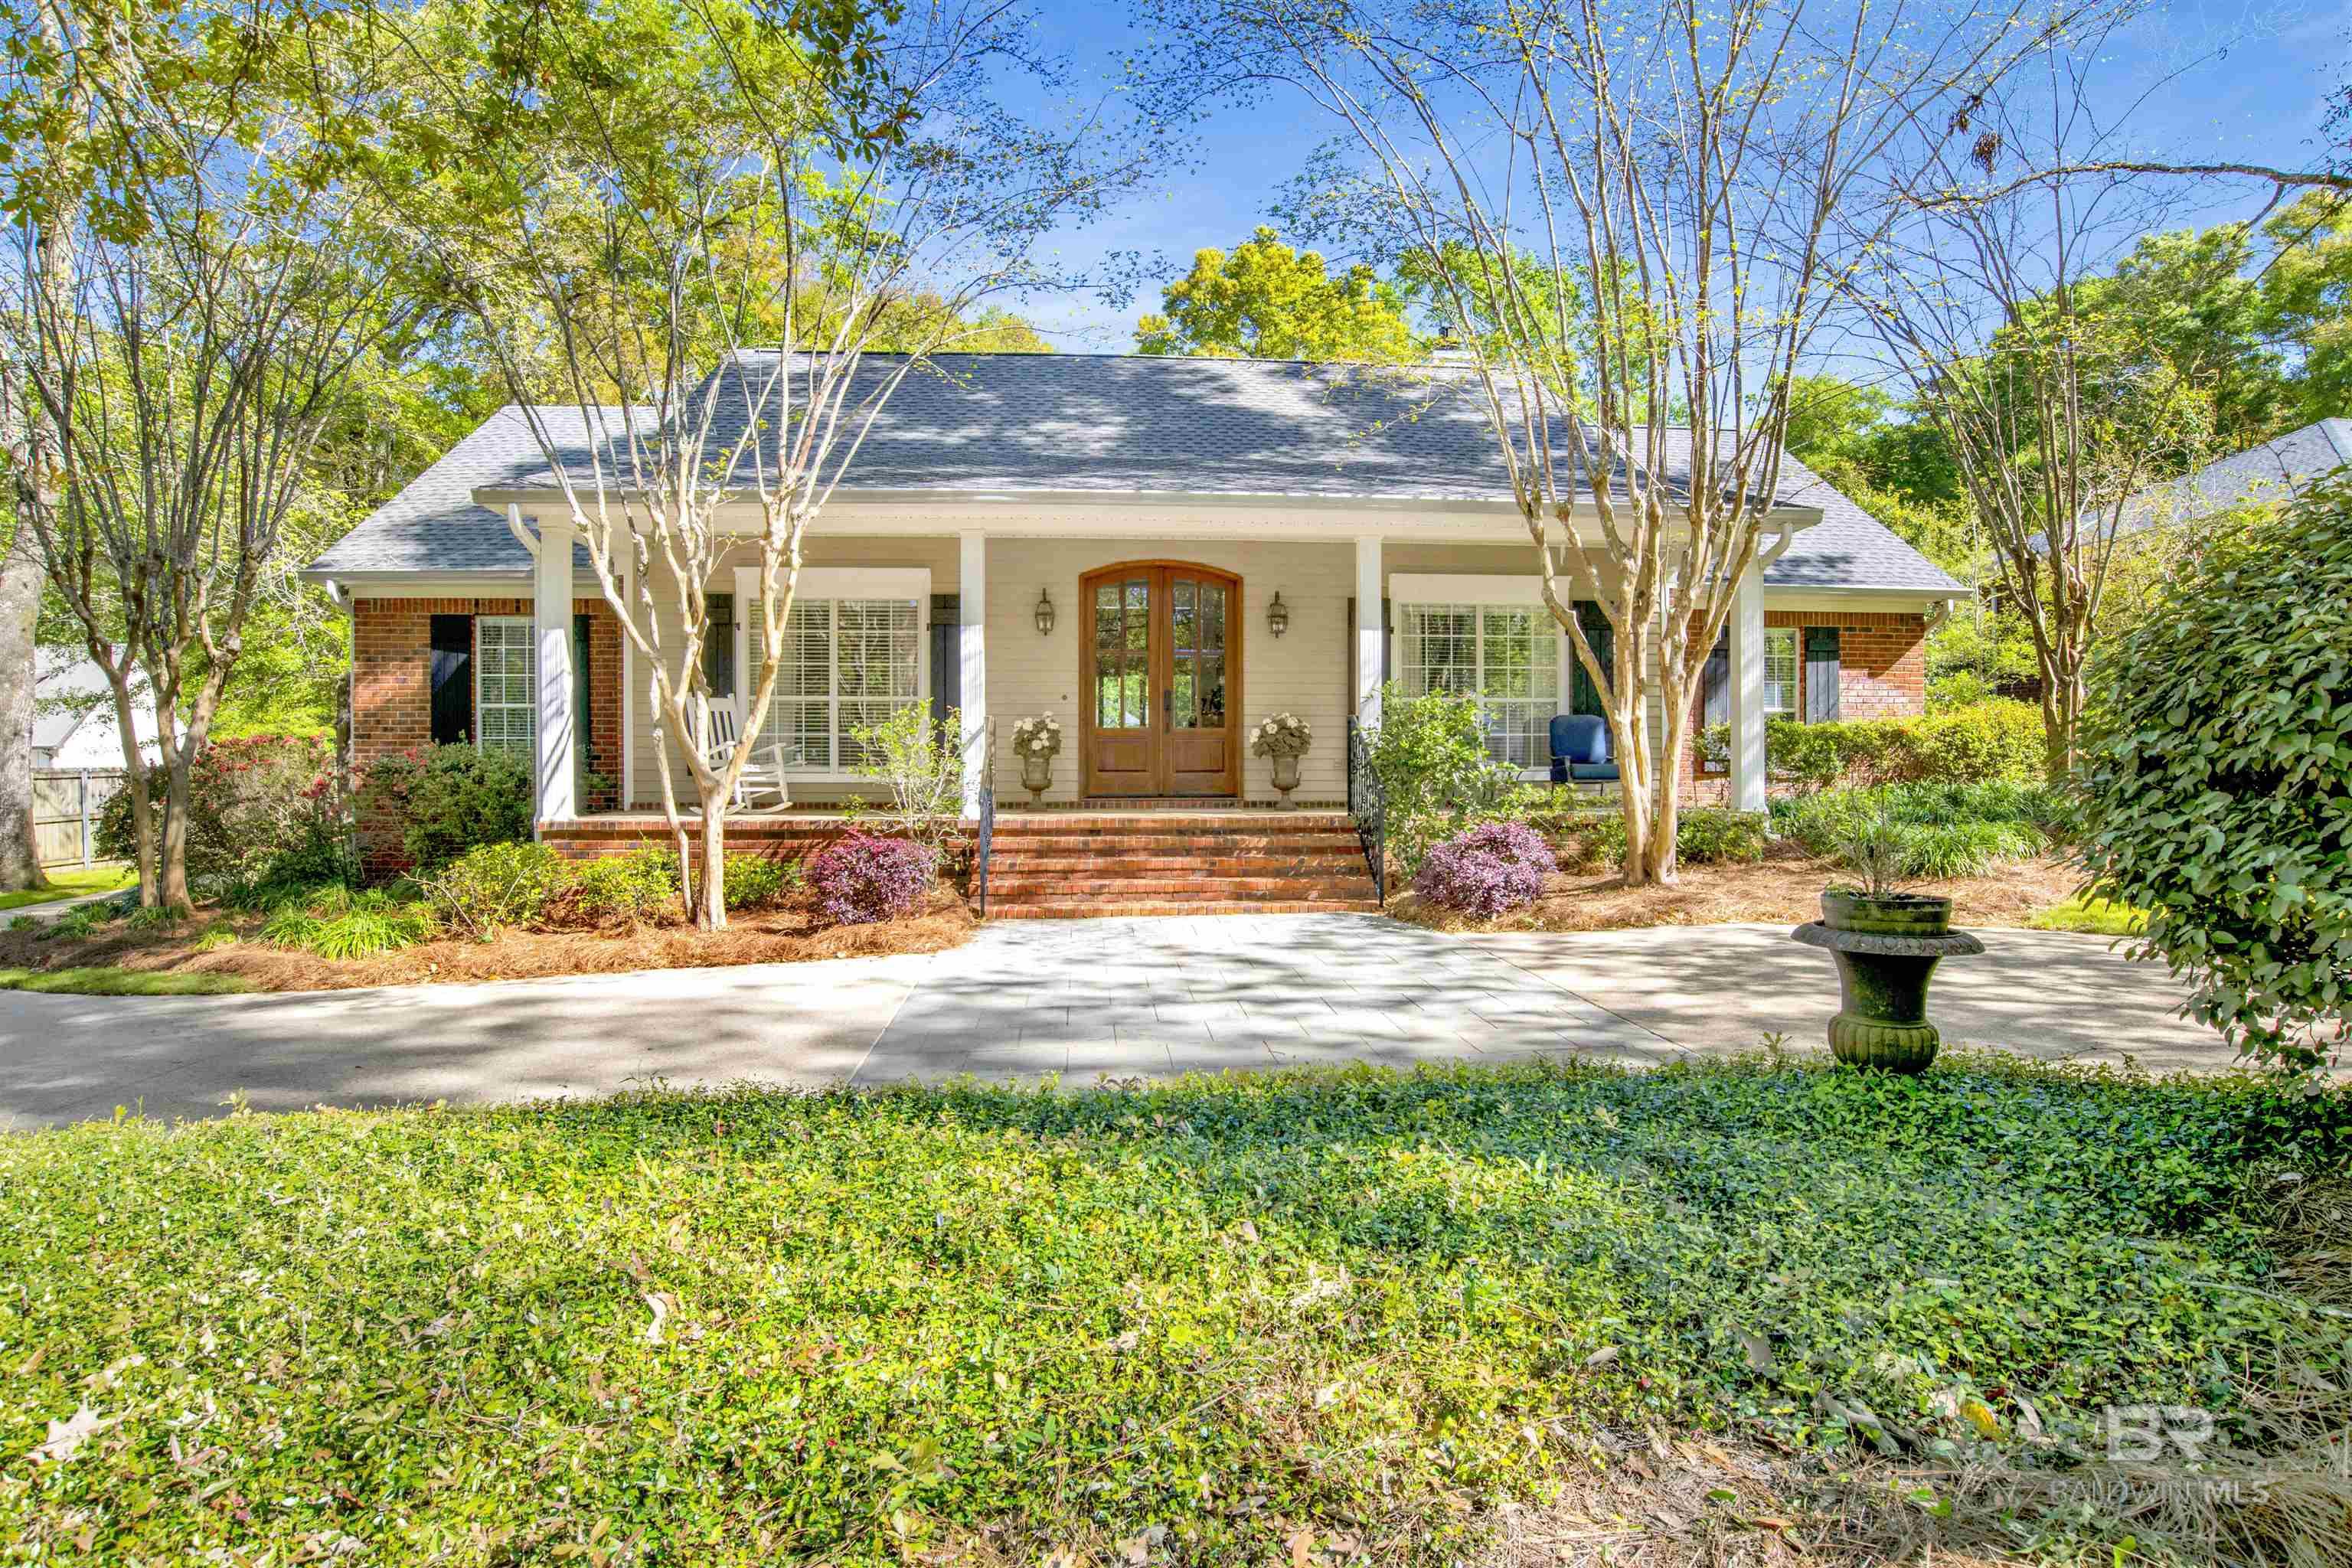 Welcome to this charming updated 4-bedroom, 3-bathroom home with sparkling pool, nestled in the heart of Olde Towne Daphne. Enjoy the convenience of walking, biking, or golf carting to nearby schools, shopping centers, restaurants, churches, and the breathtaking Mobile Bay sunsets. Situated on a spacious and picturesque wooded lot, this home offers a tranquil retreat from the hustle and bustle of everyday life.  The backyard oasis features a refreshing pool, perfect for creating cherished outdoor memories with friends and family. Meticulously maintained, this home exudes pride of ownership, ensuring a turnkey living experience for its new owners.  Experience the vibrant community of Olde Towne Daphne, known for its friendly residents, thriving businesses, and abundant natural beauty. Don't miss out on this incredible opportunity to own a piece of paradise in this sought-after area. Schedule your showing today!